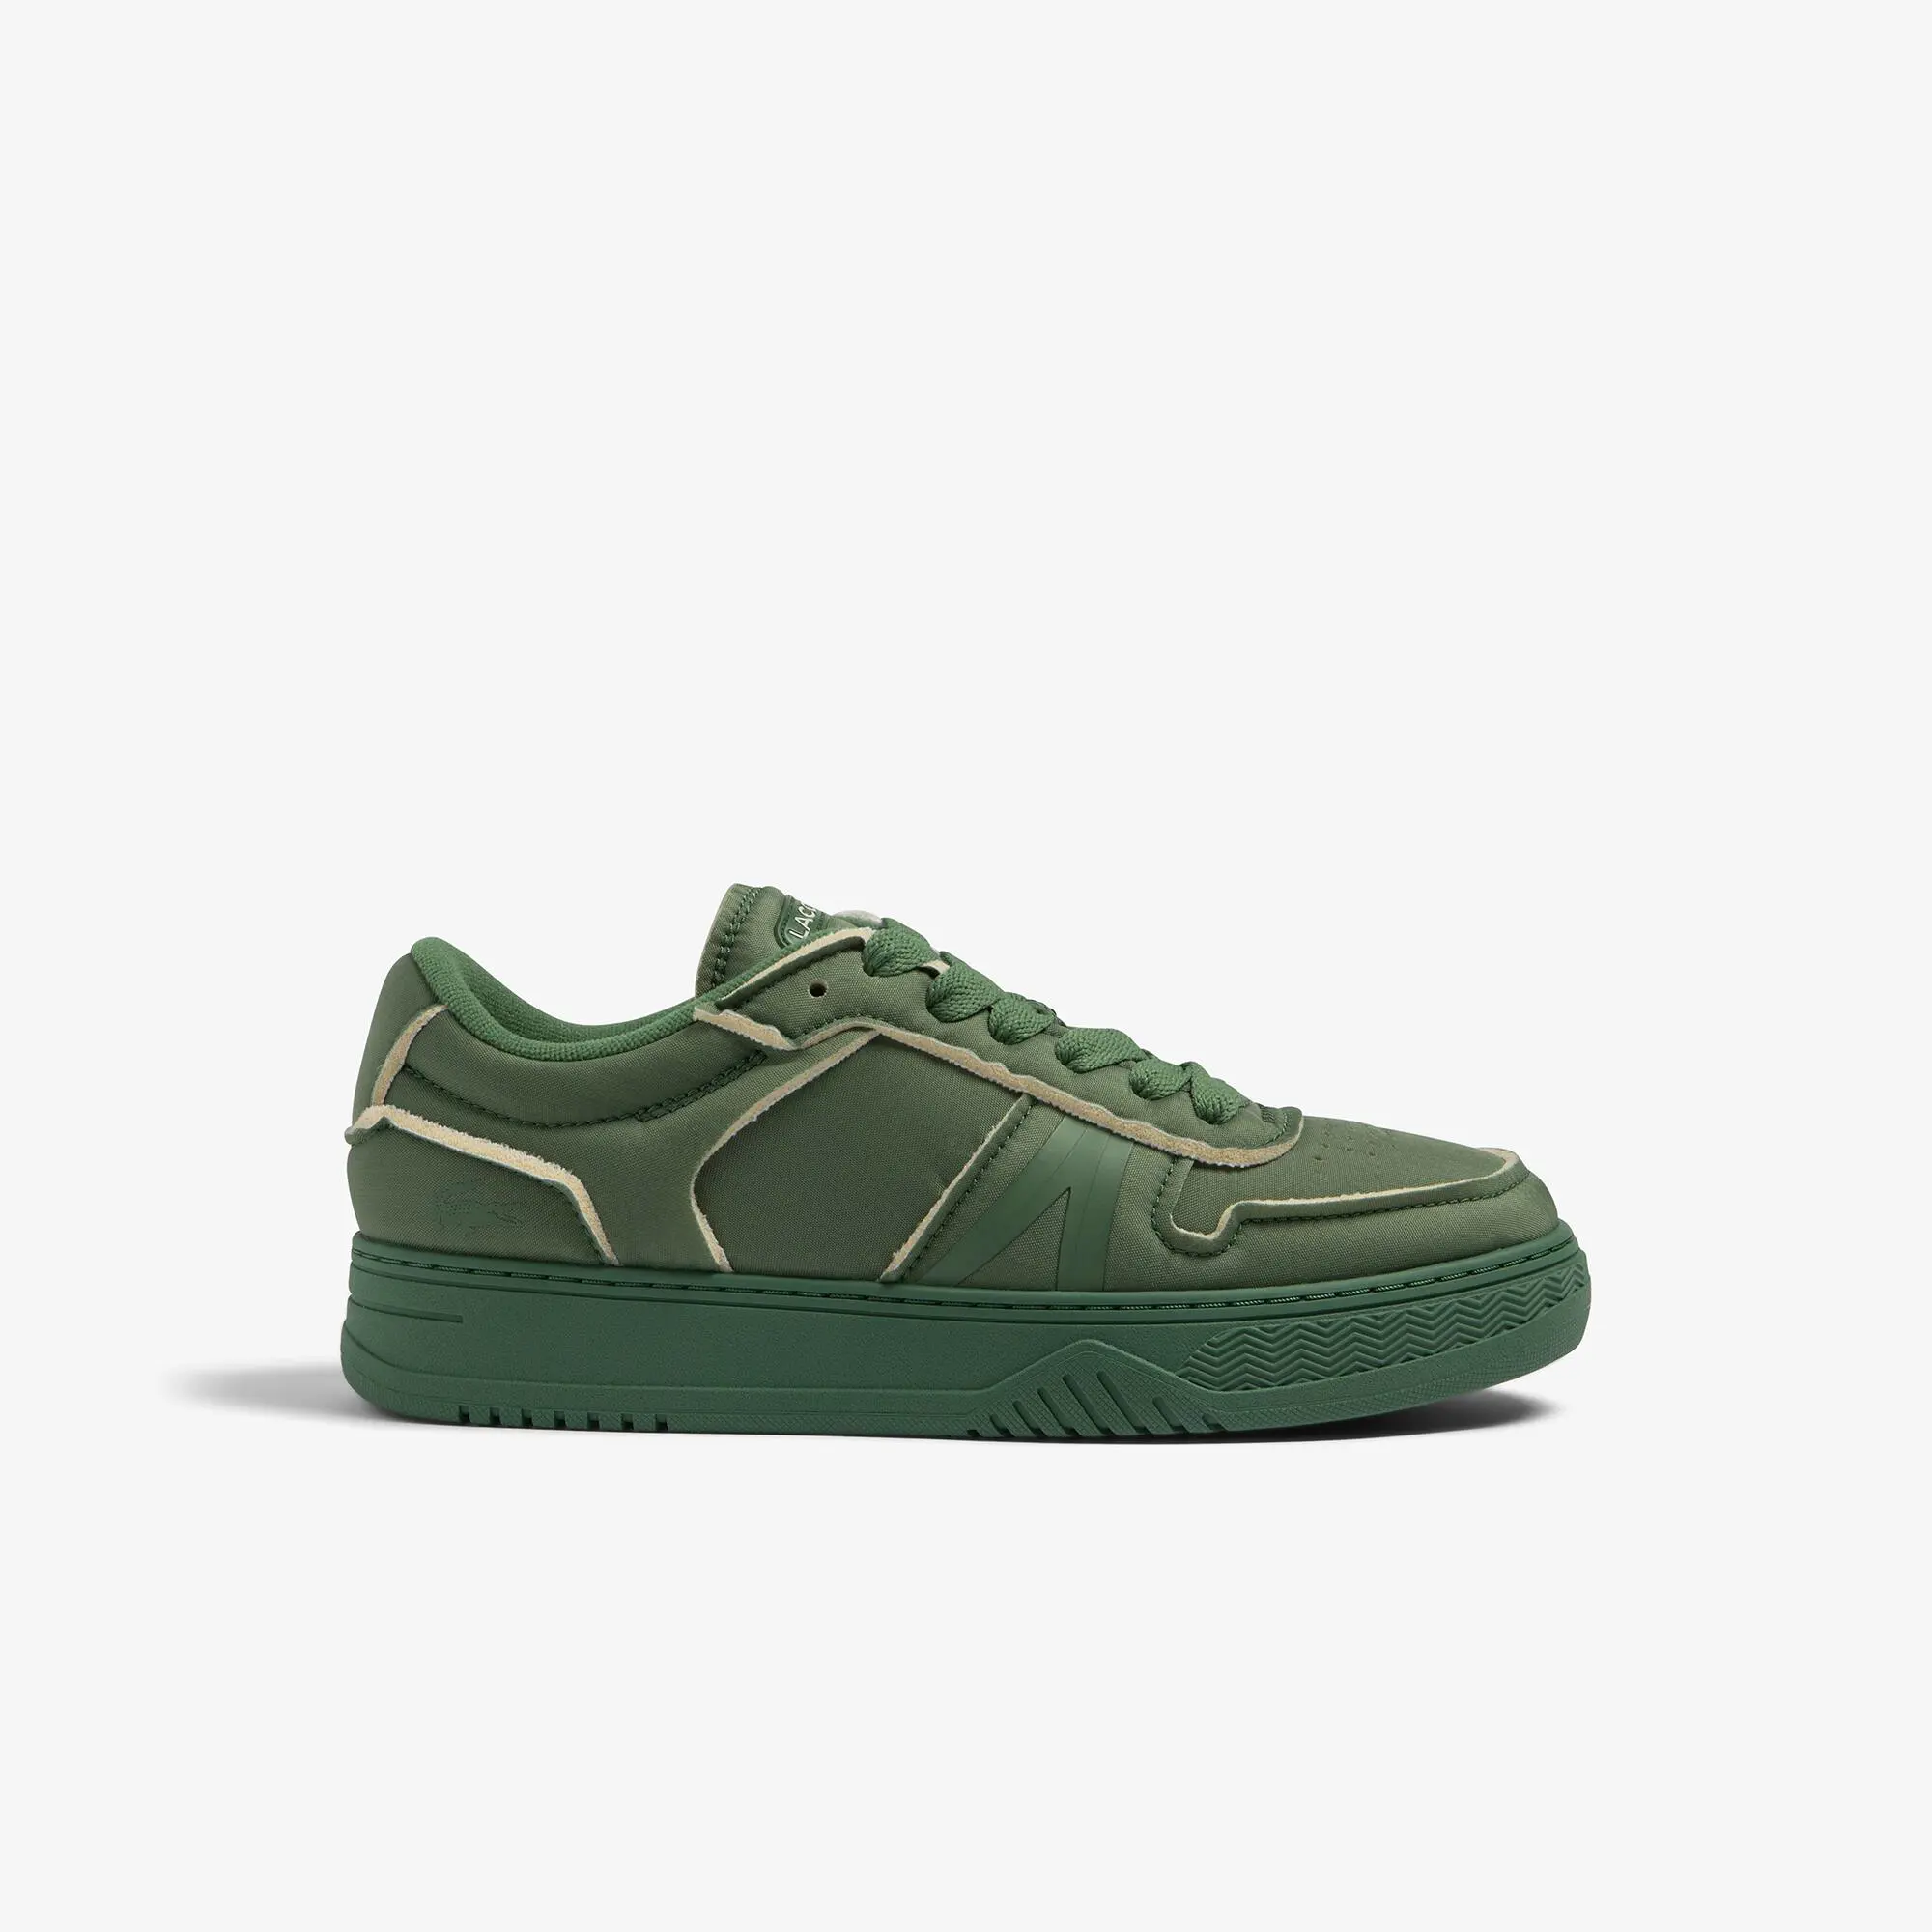 Lacoste Men's Lacoste L001 Crafted Textile Trainers. 1